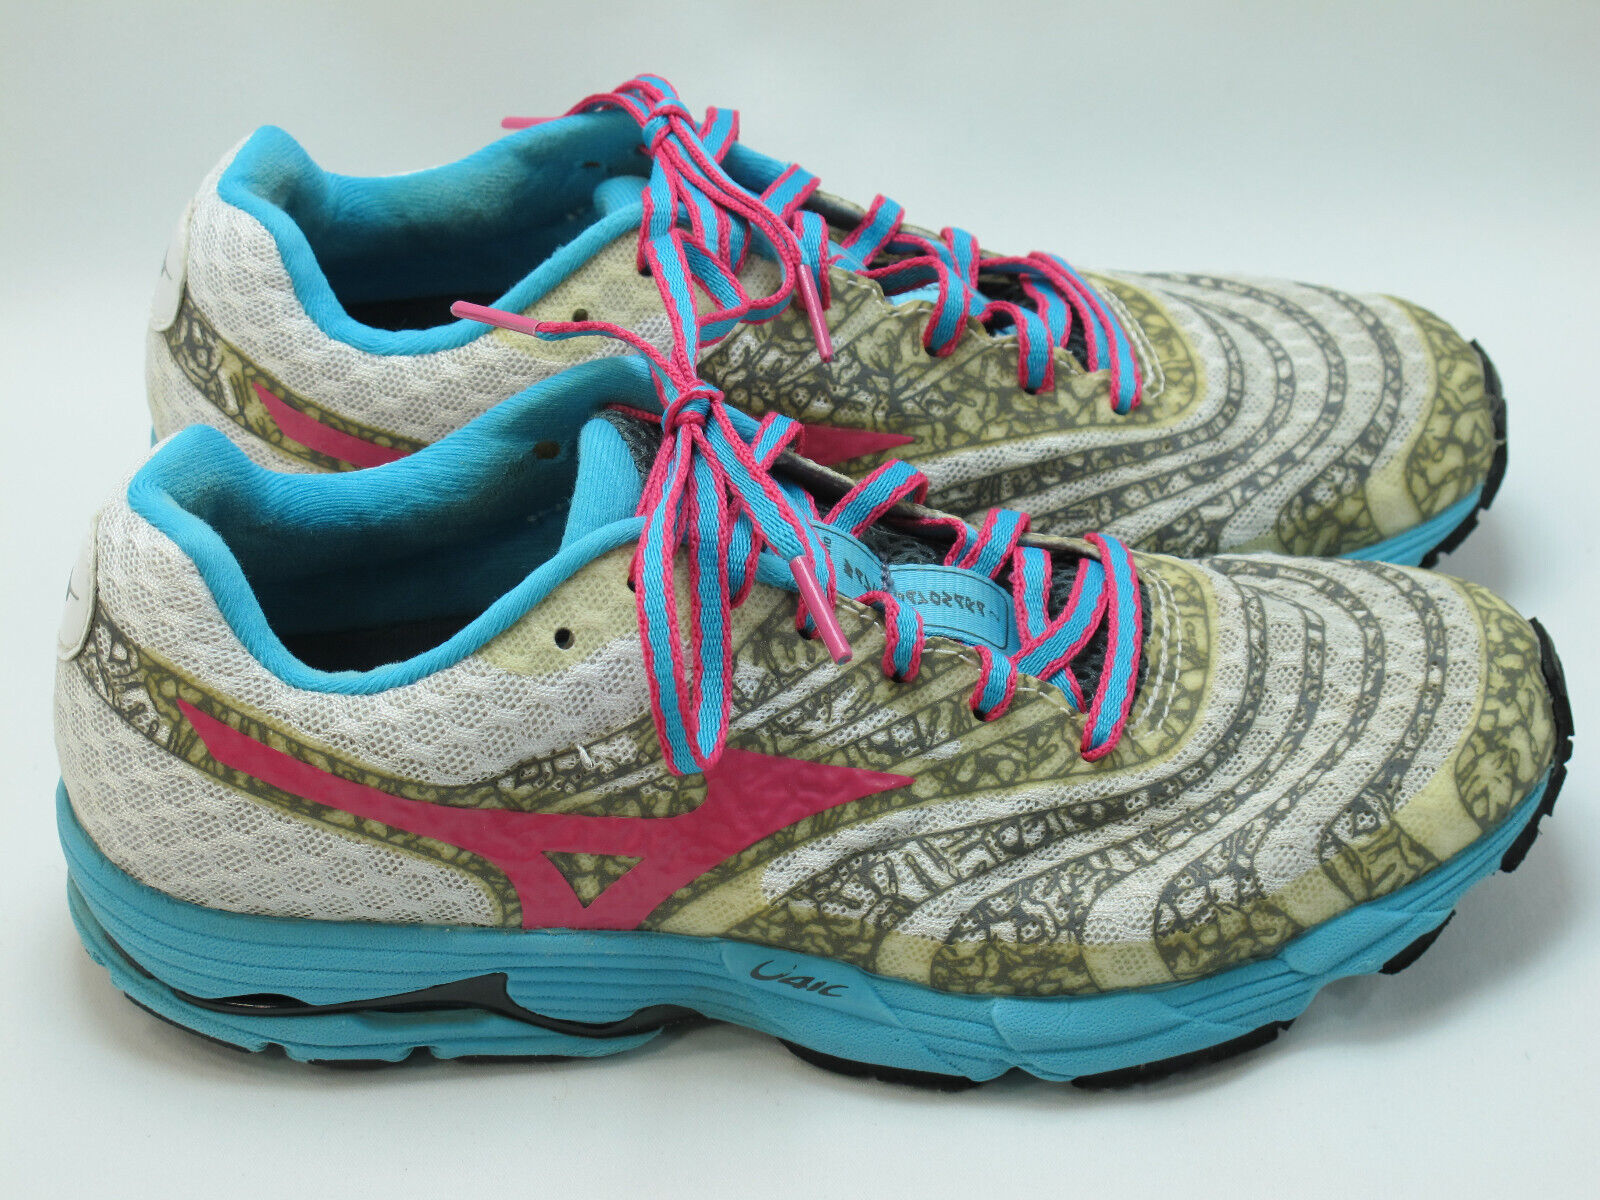 Primary image for Mizuno Wave Sayonara 2 Running Shoes Women’s Size 7.5 US Excellent Plus White